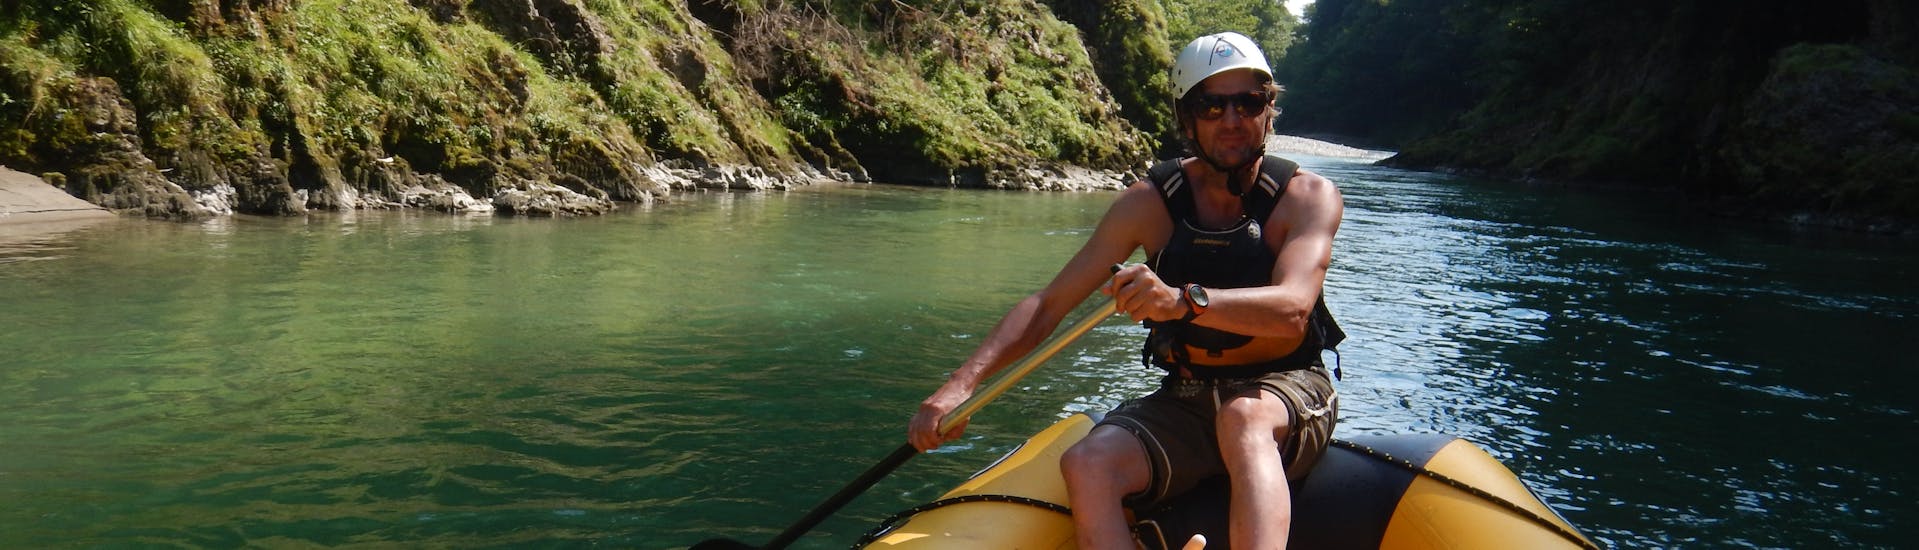 A picture of our Guide from Outdoor Guide Kaiserwinkl while Rafting on the Kitzbüheler Ache Daytour.